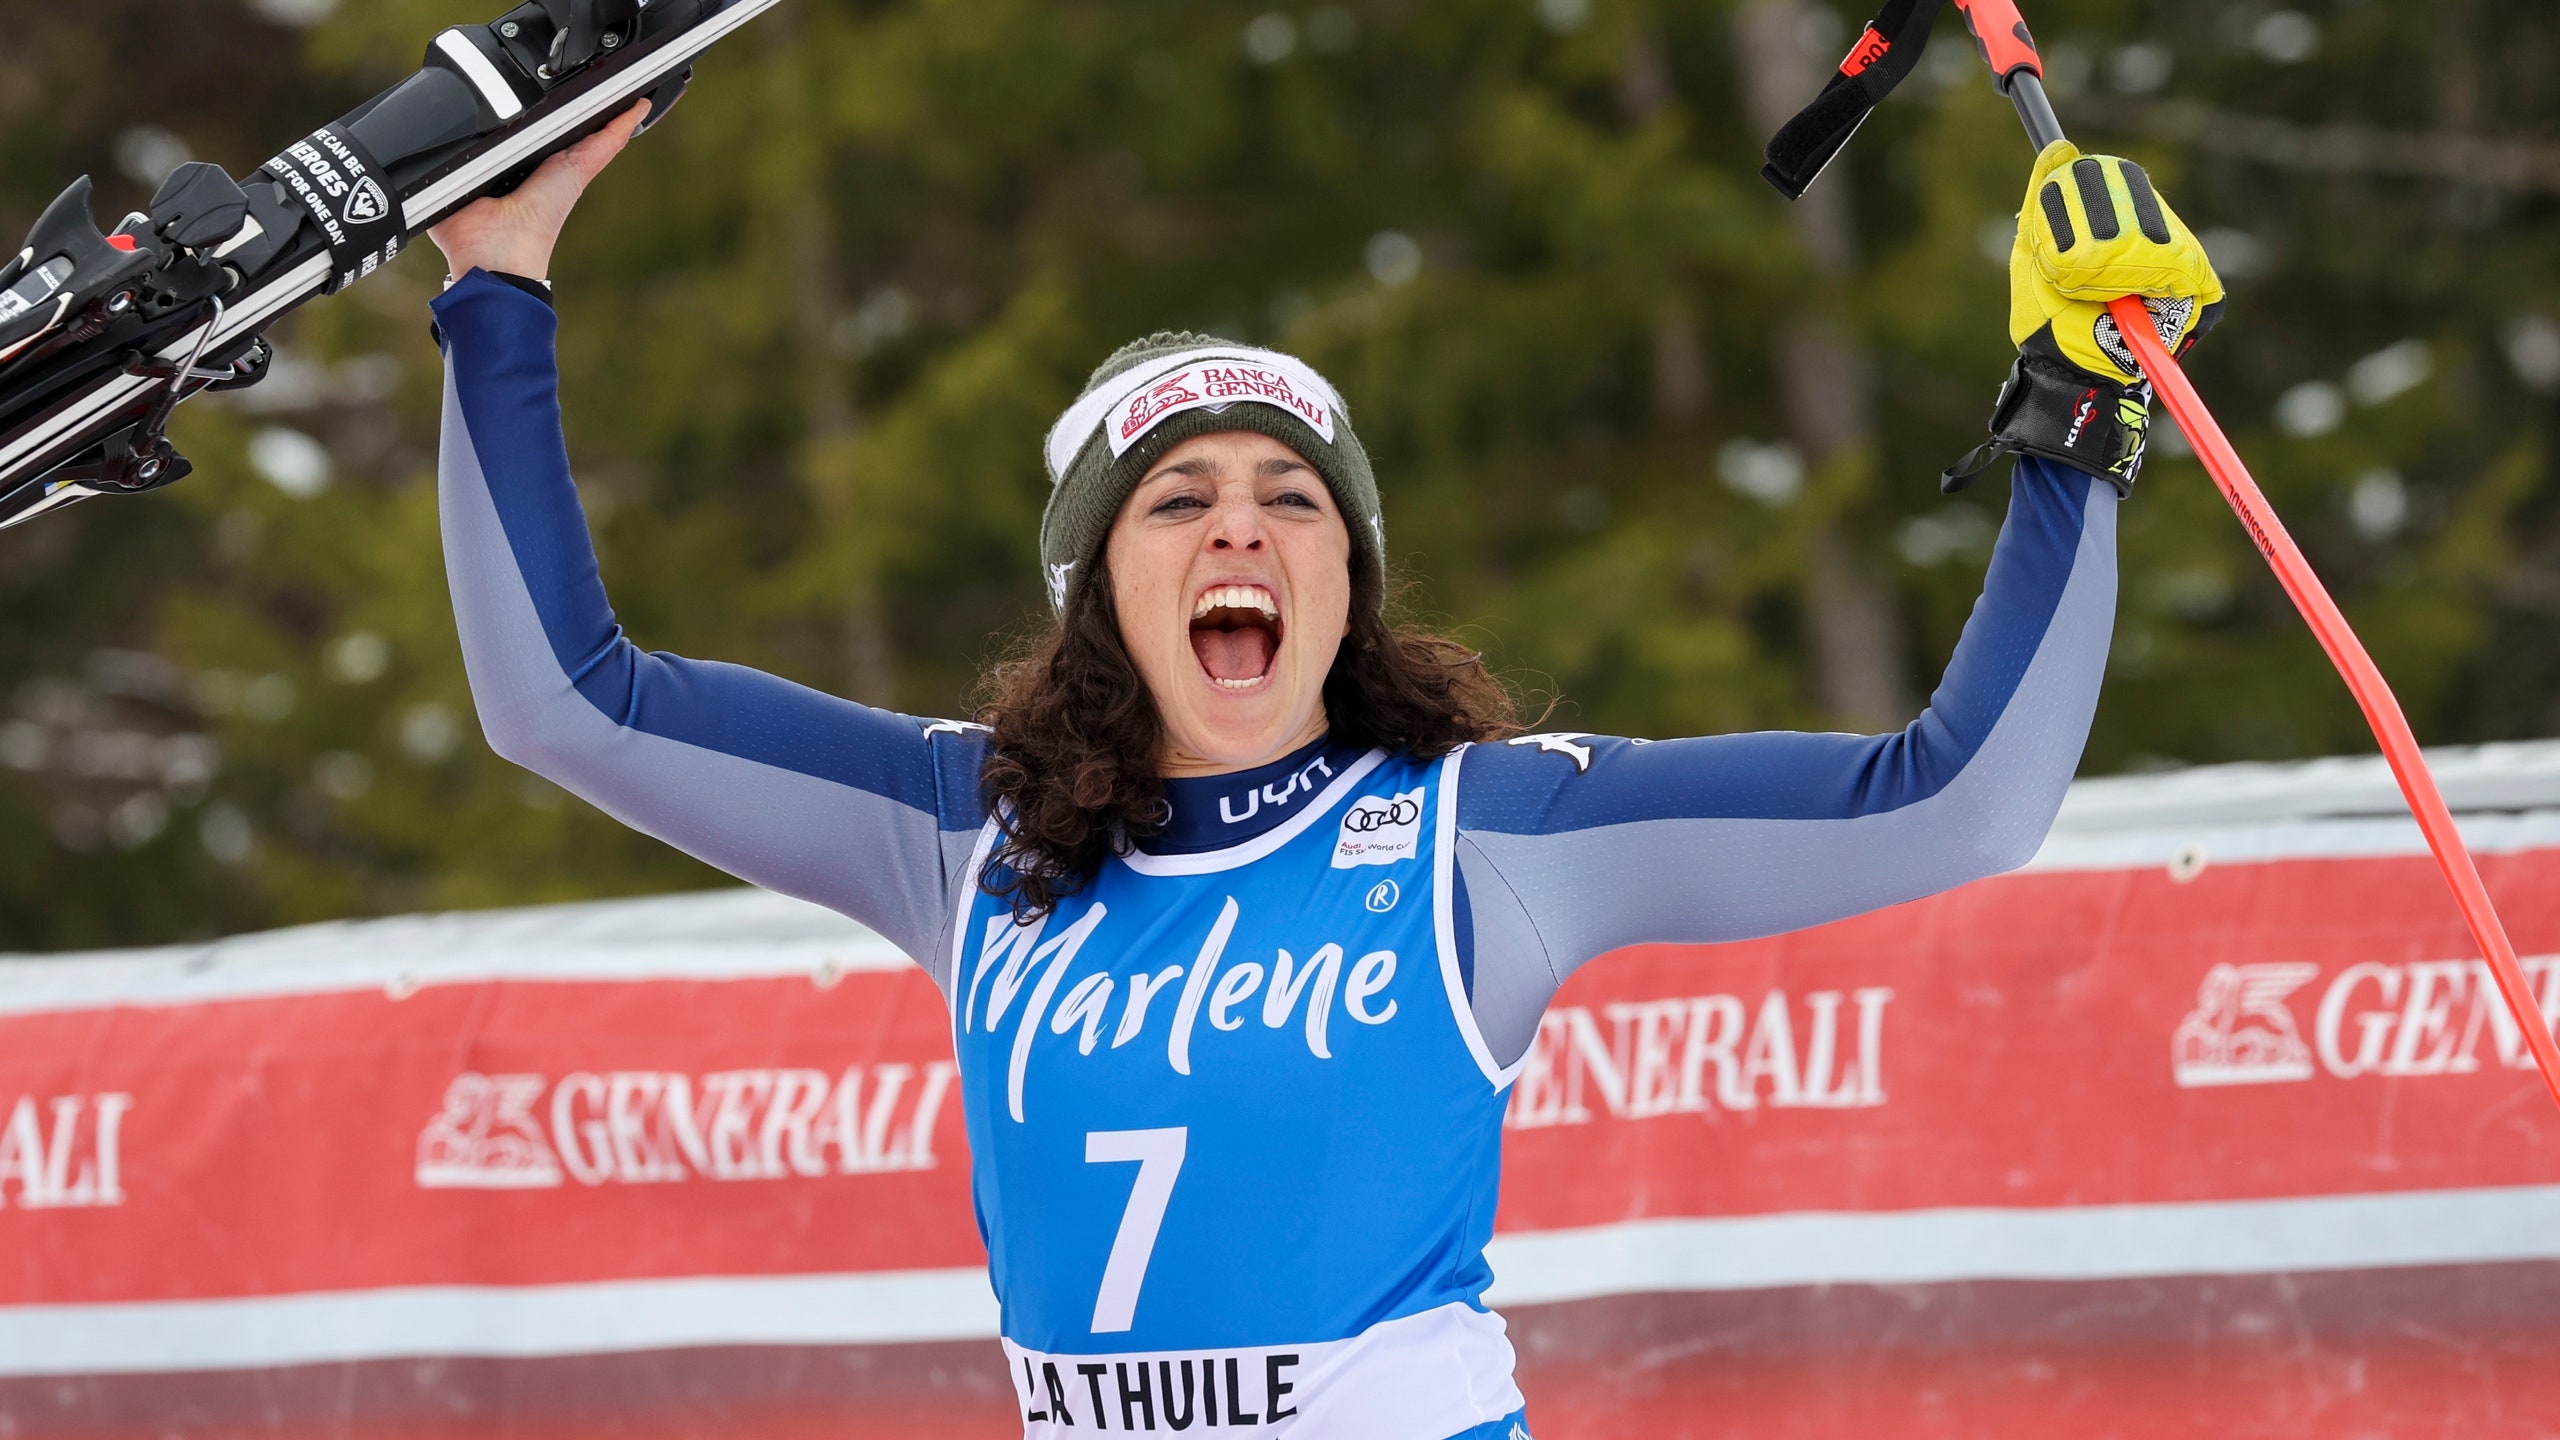 Brignone wins combined title as World Cup finish is in doubt | FOX Sports